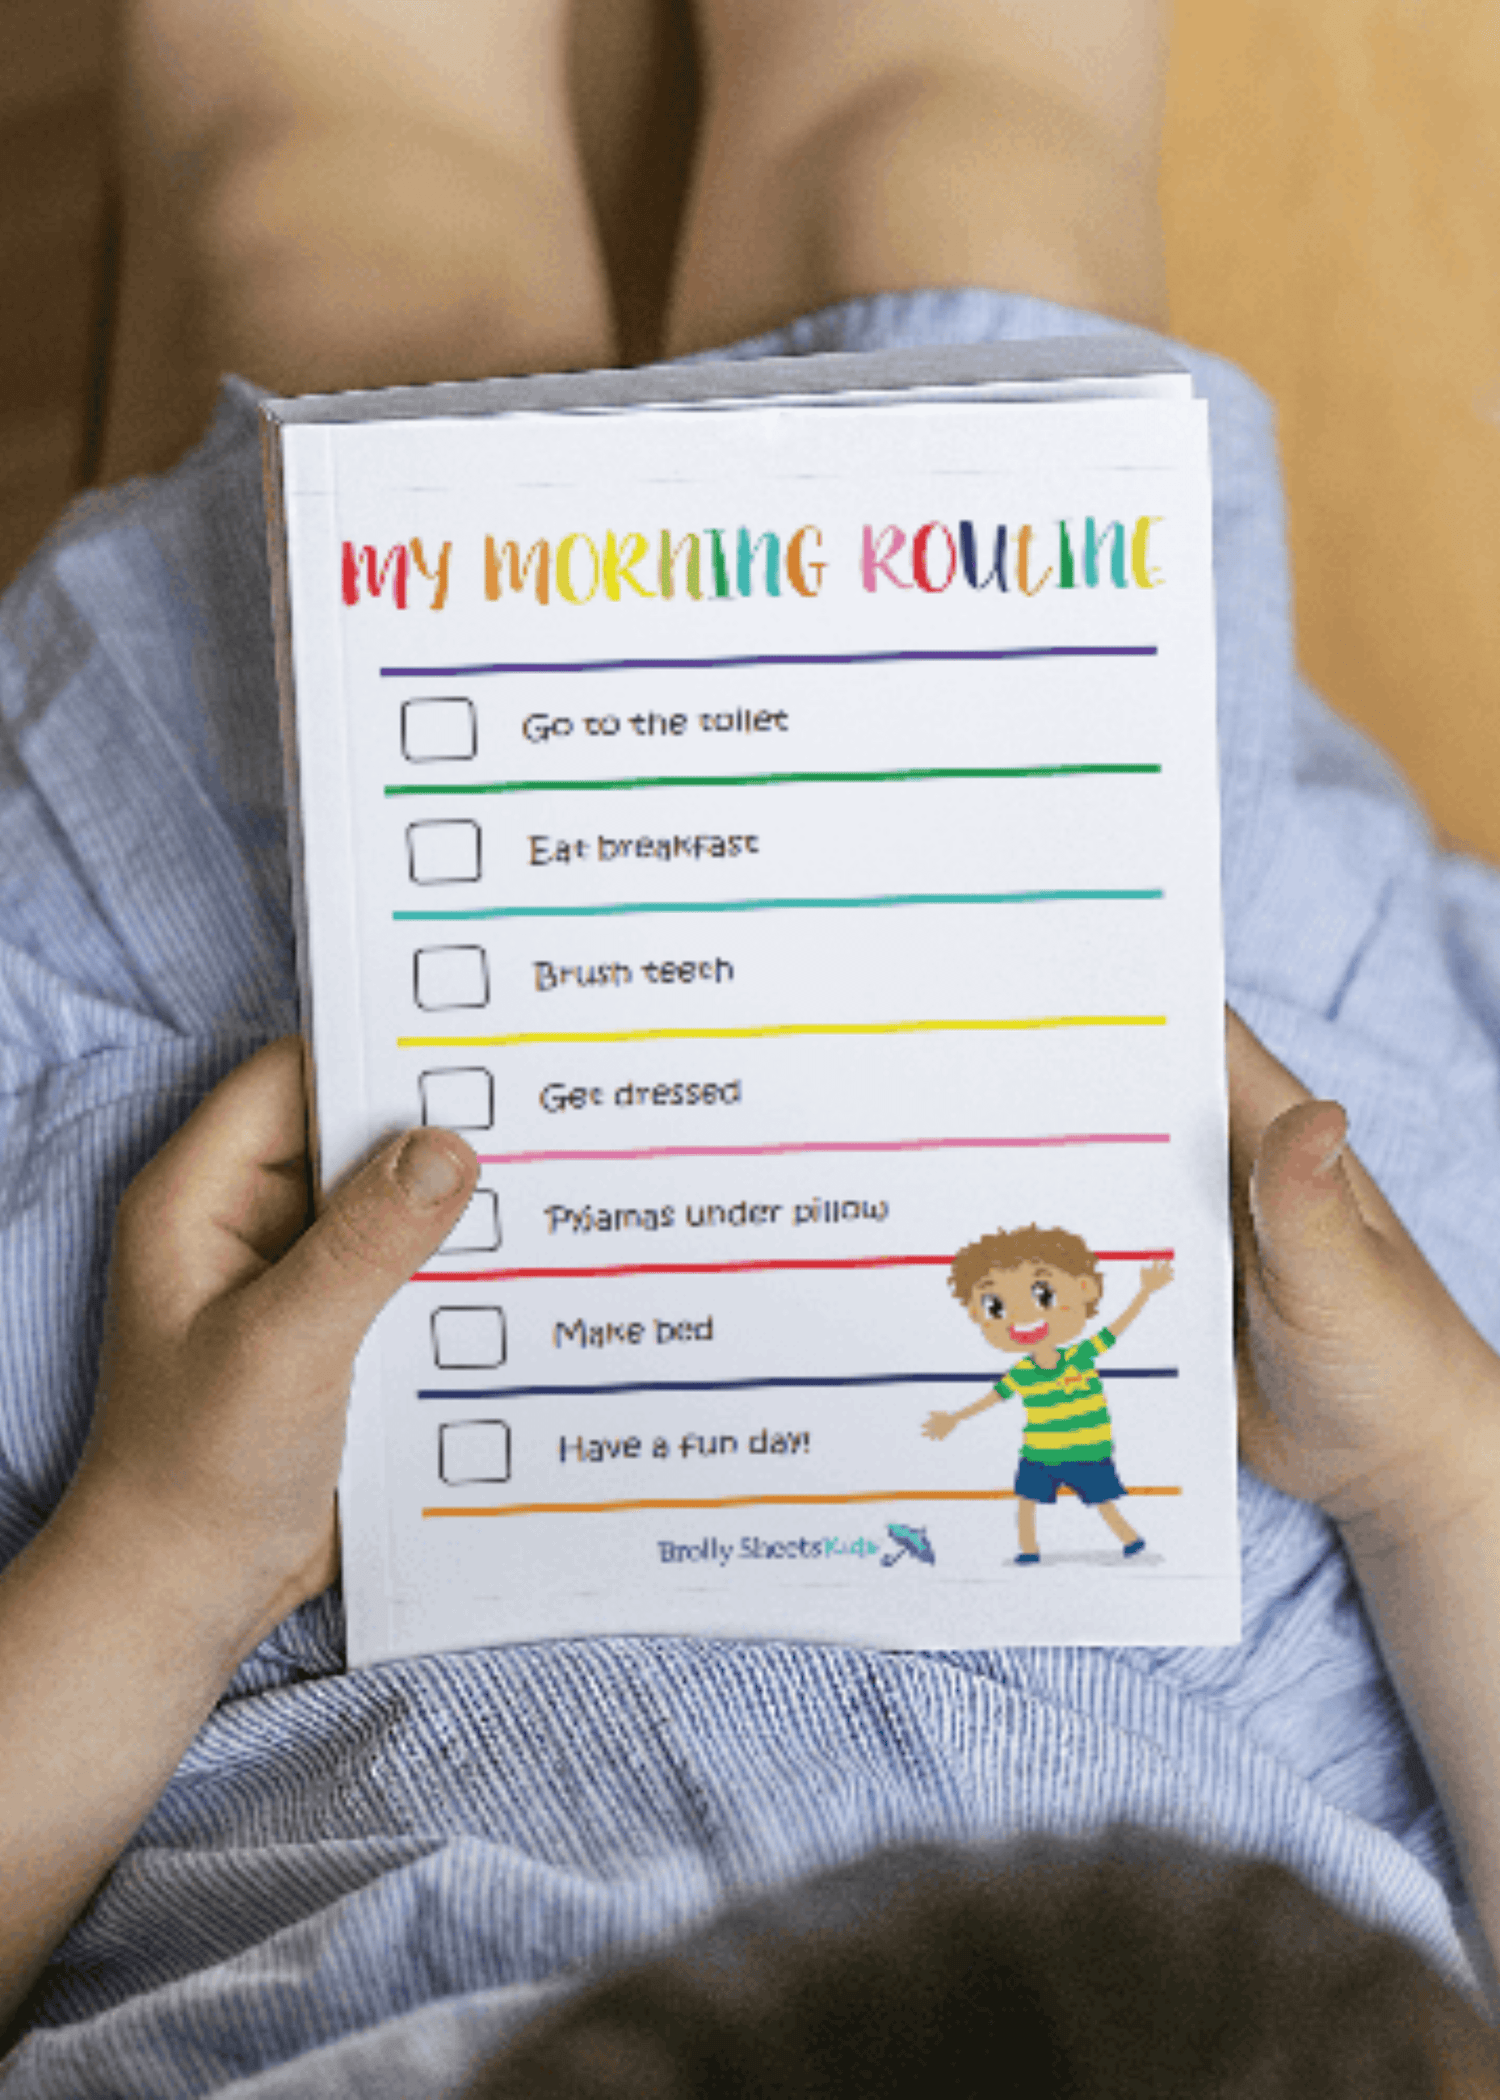 Routine chart being held by young child